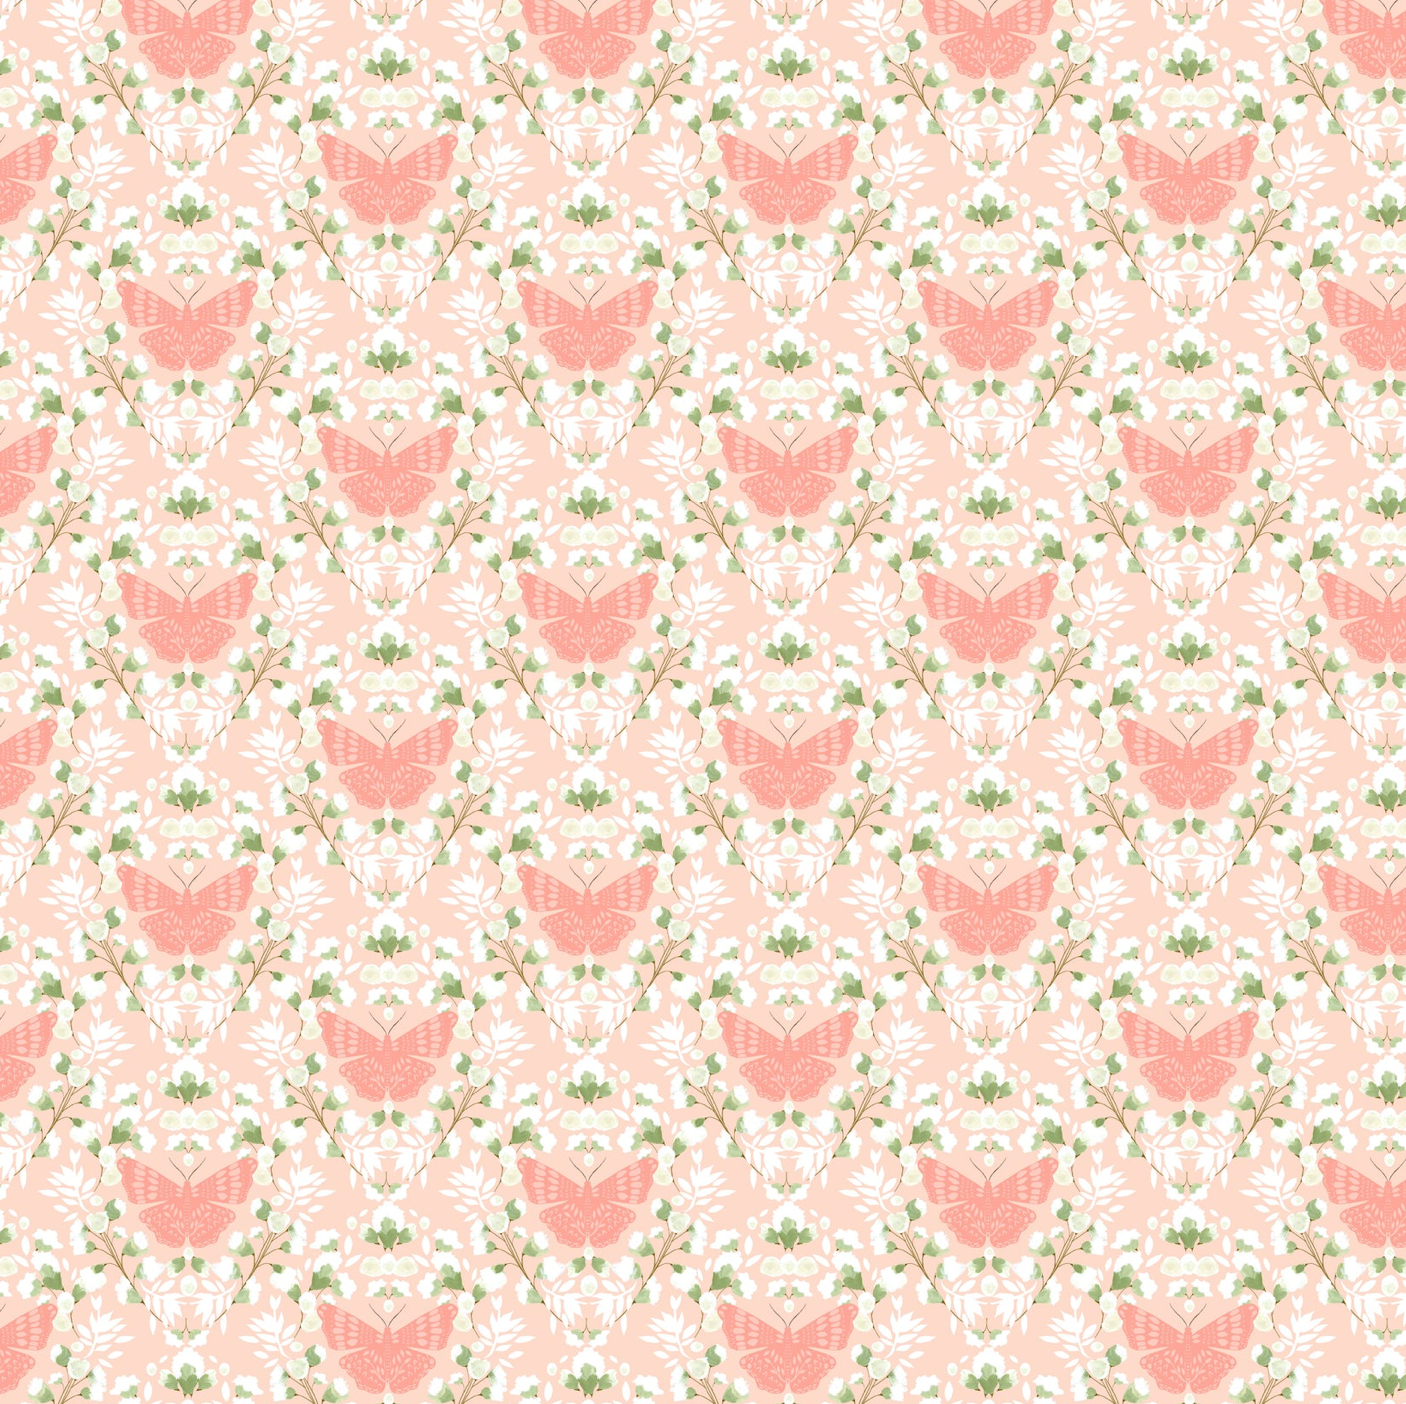 Serenity Blooms, Sacred Flight Peach, SR24513, sold by the 1/2 yard, *PREORDER